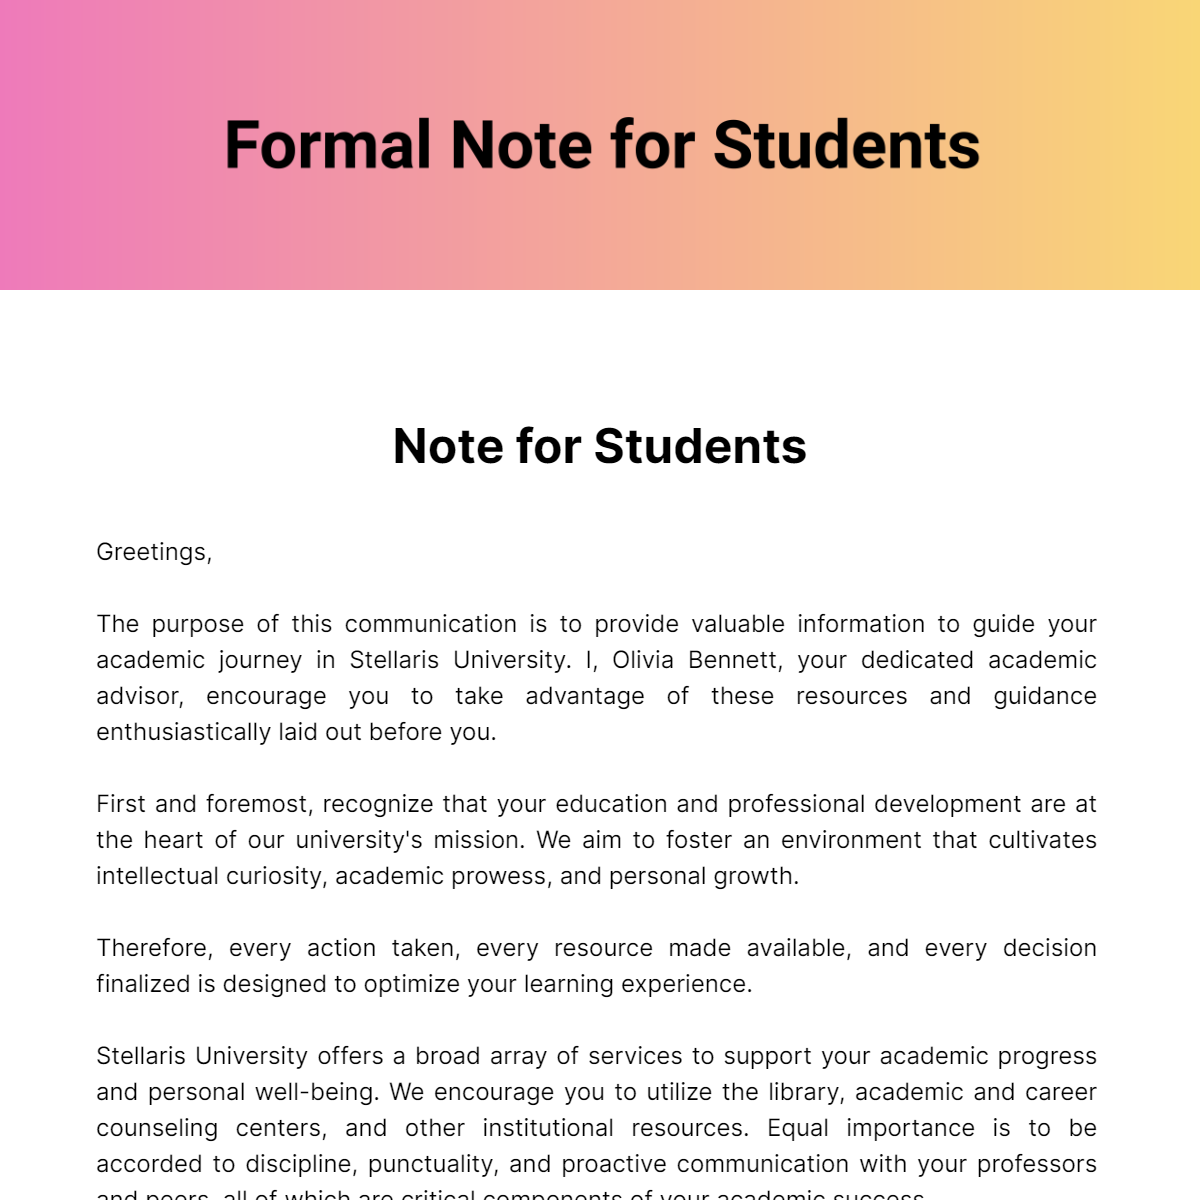 Formal Note for Students Template